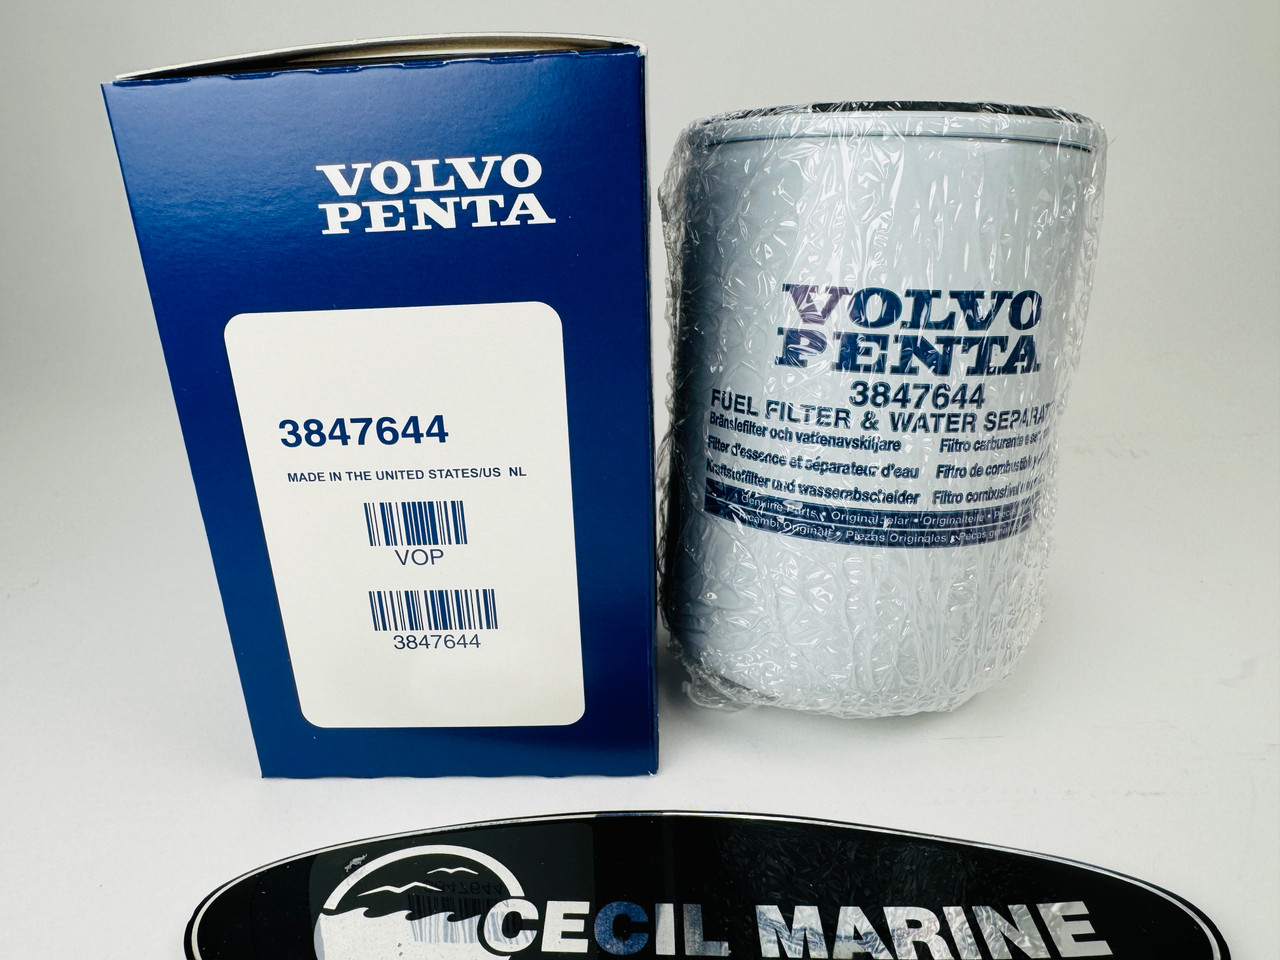 $19.99* GENUINE VOLVO no tax* FUEL FILTER 3847644 *In Stock & Ready To Ship!